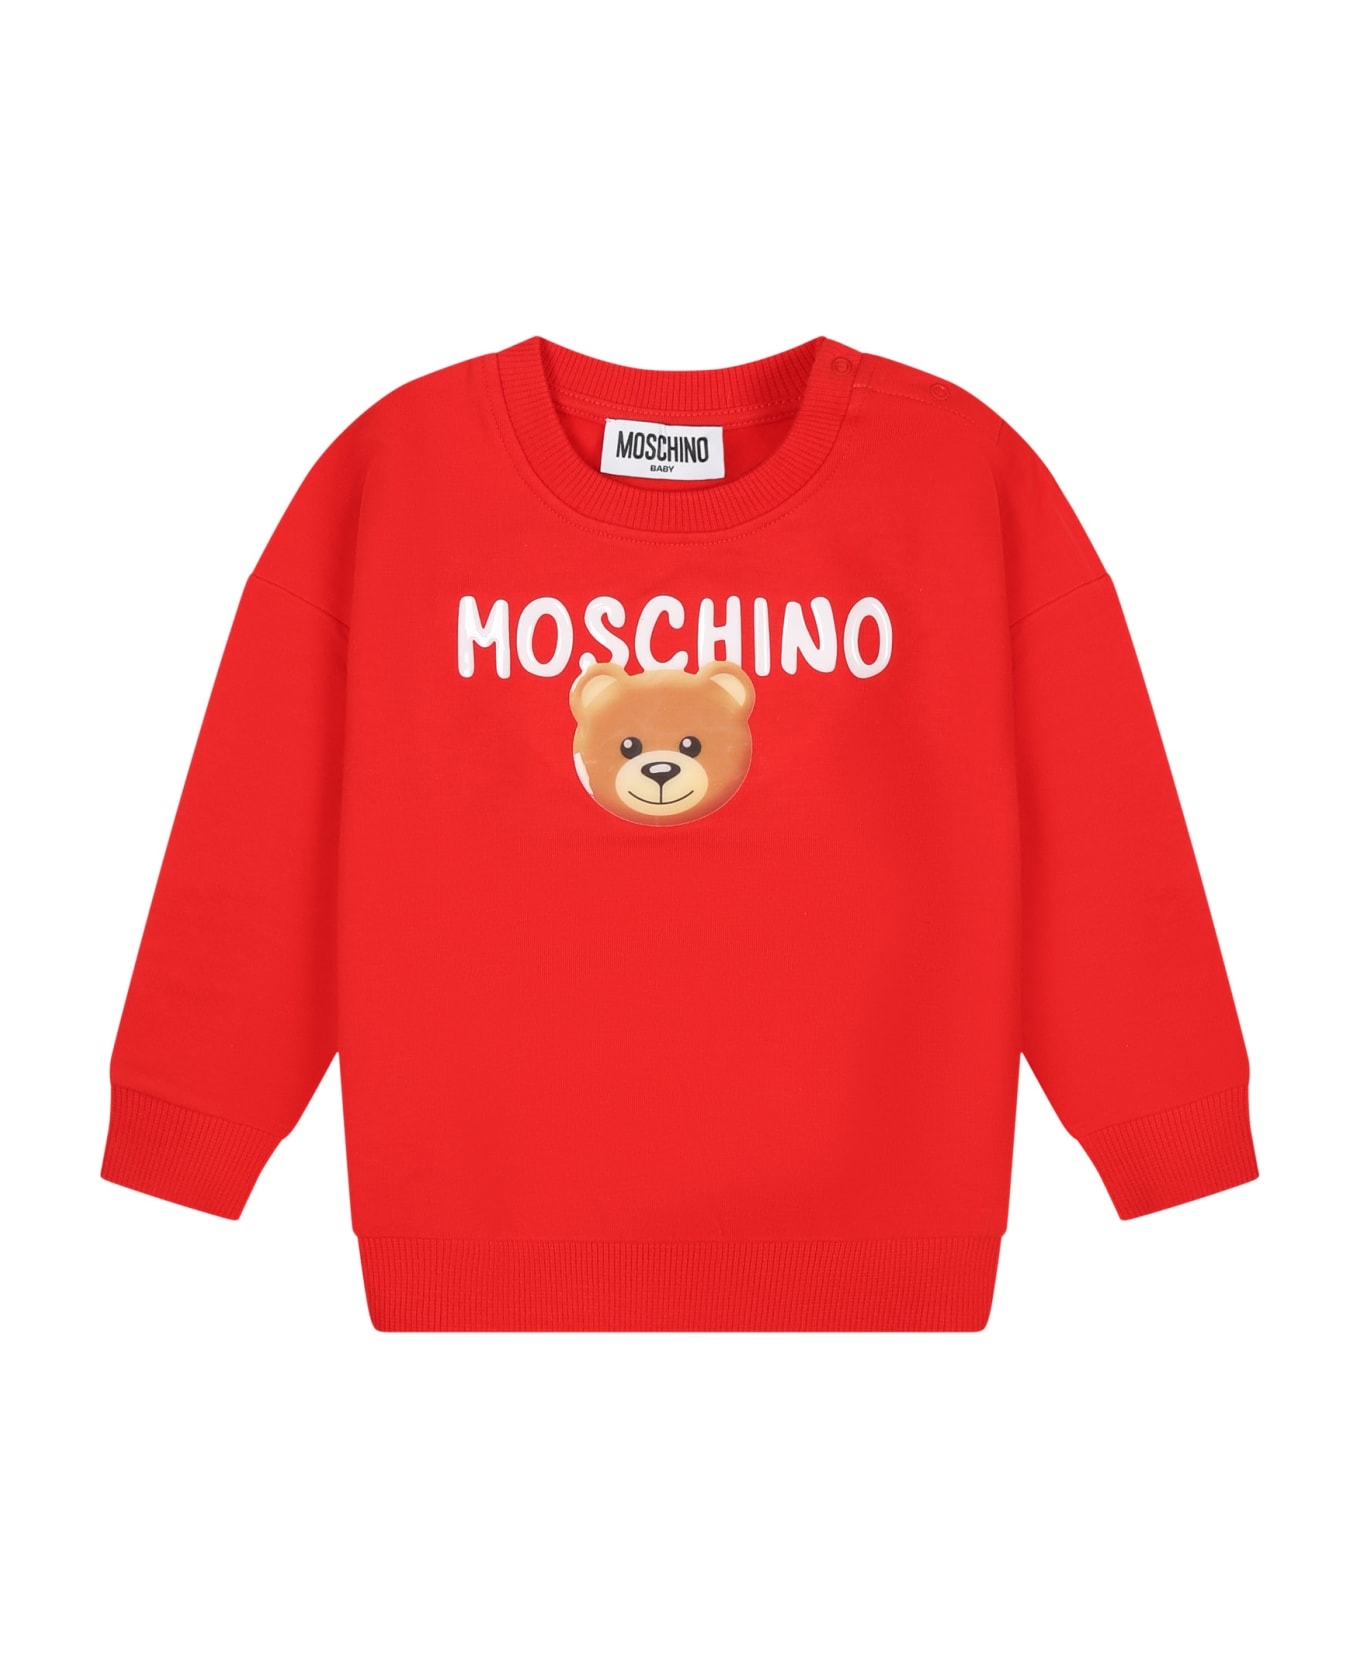 Moschino Red Sweatshirt For Baby Girl With Teddy Bear And Logo - Red